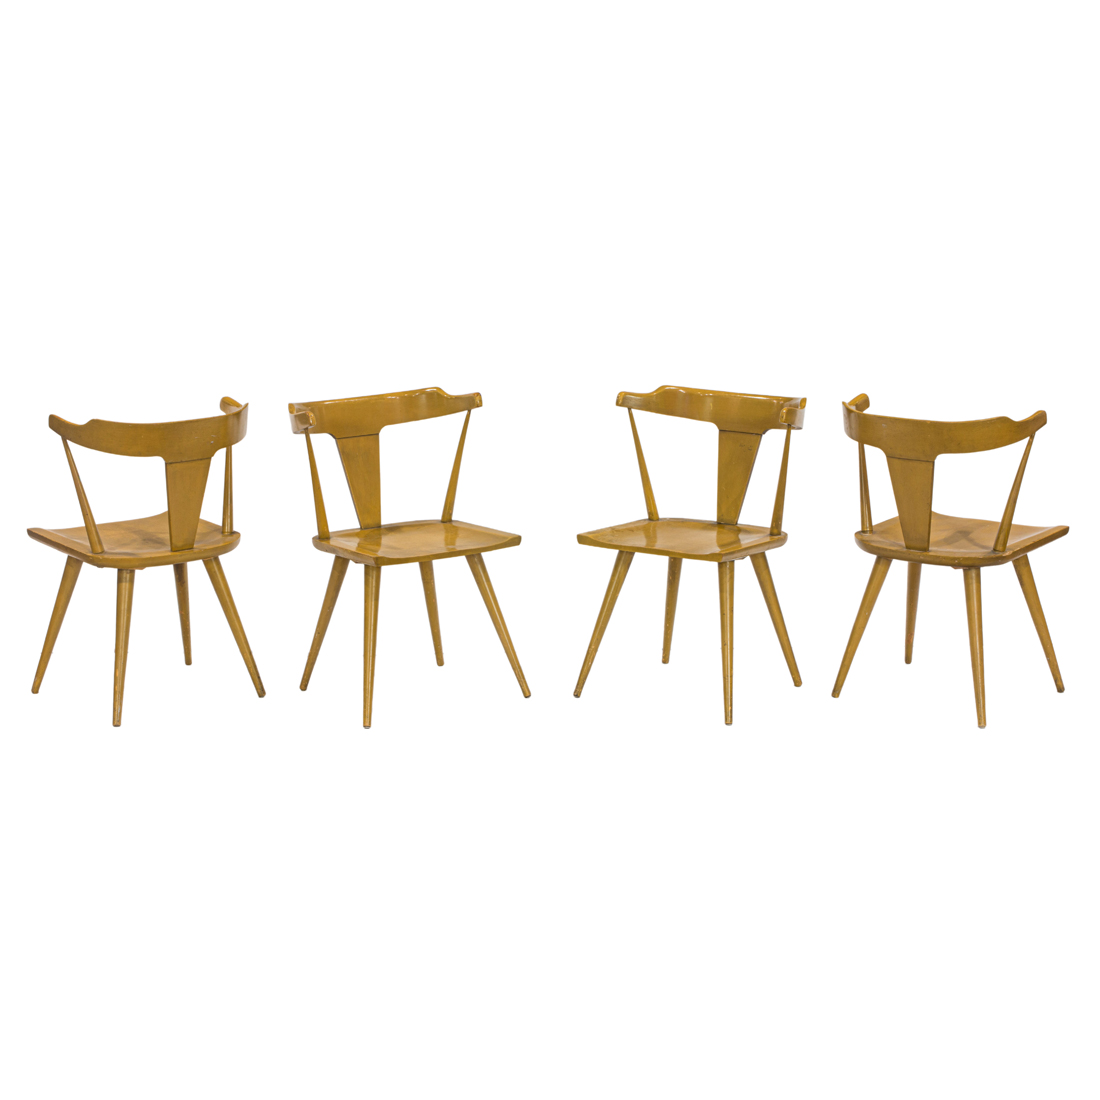 PAUL MCCOBB, T-BACK DINING CHAIRS,